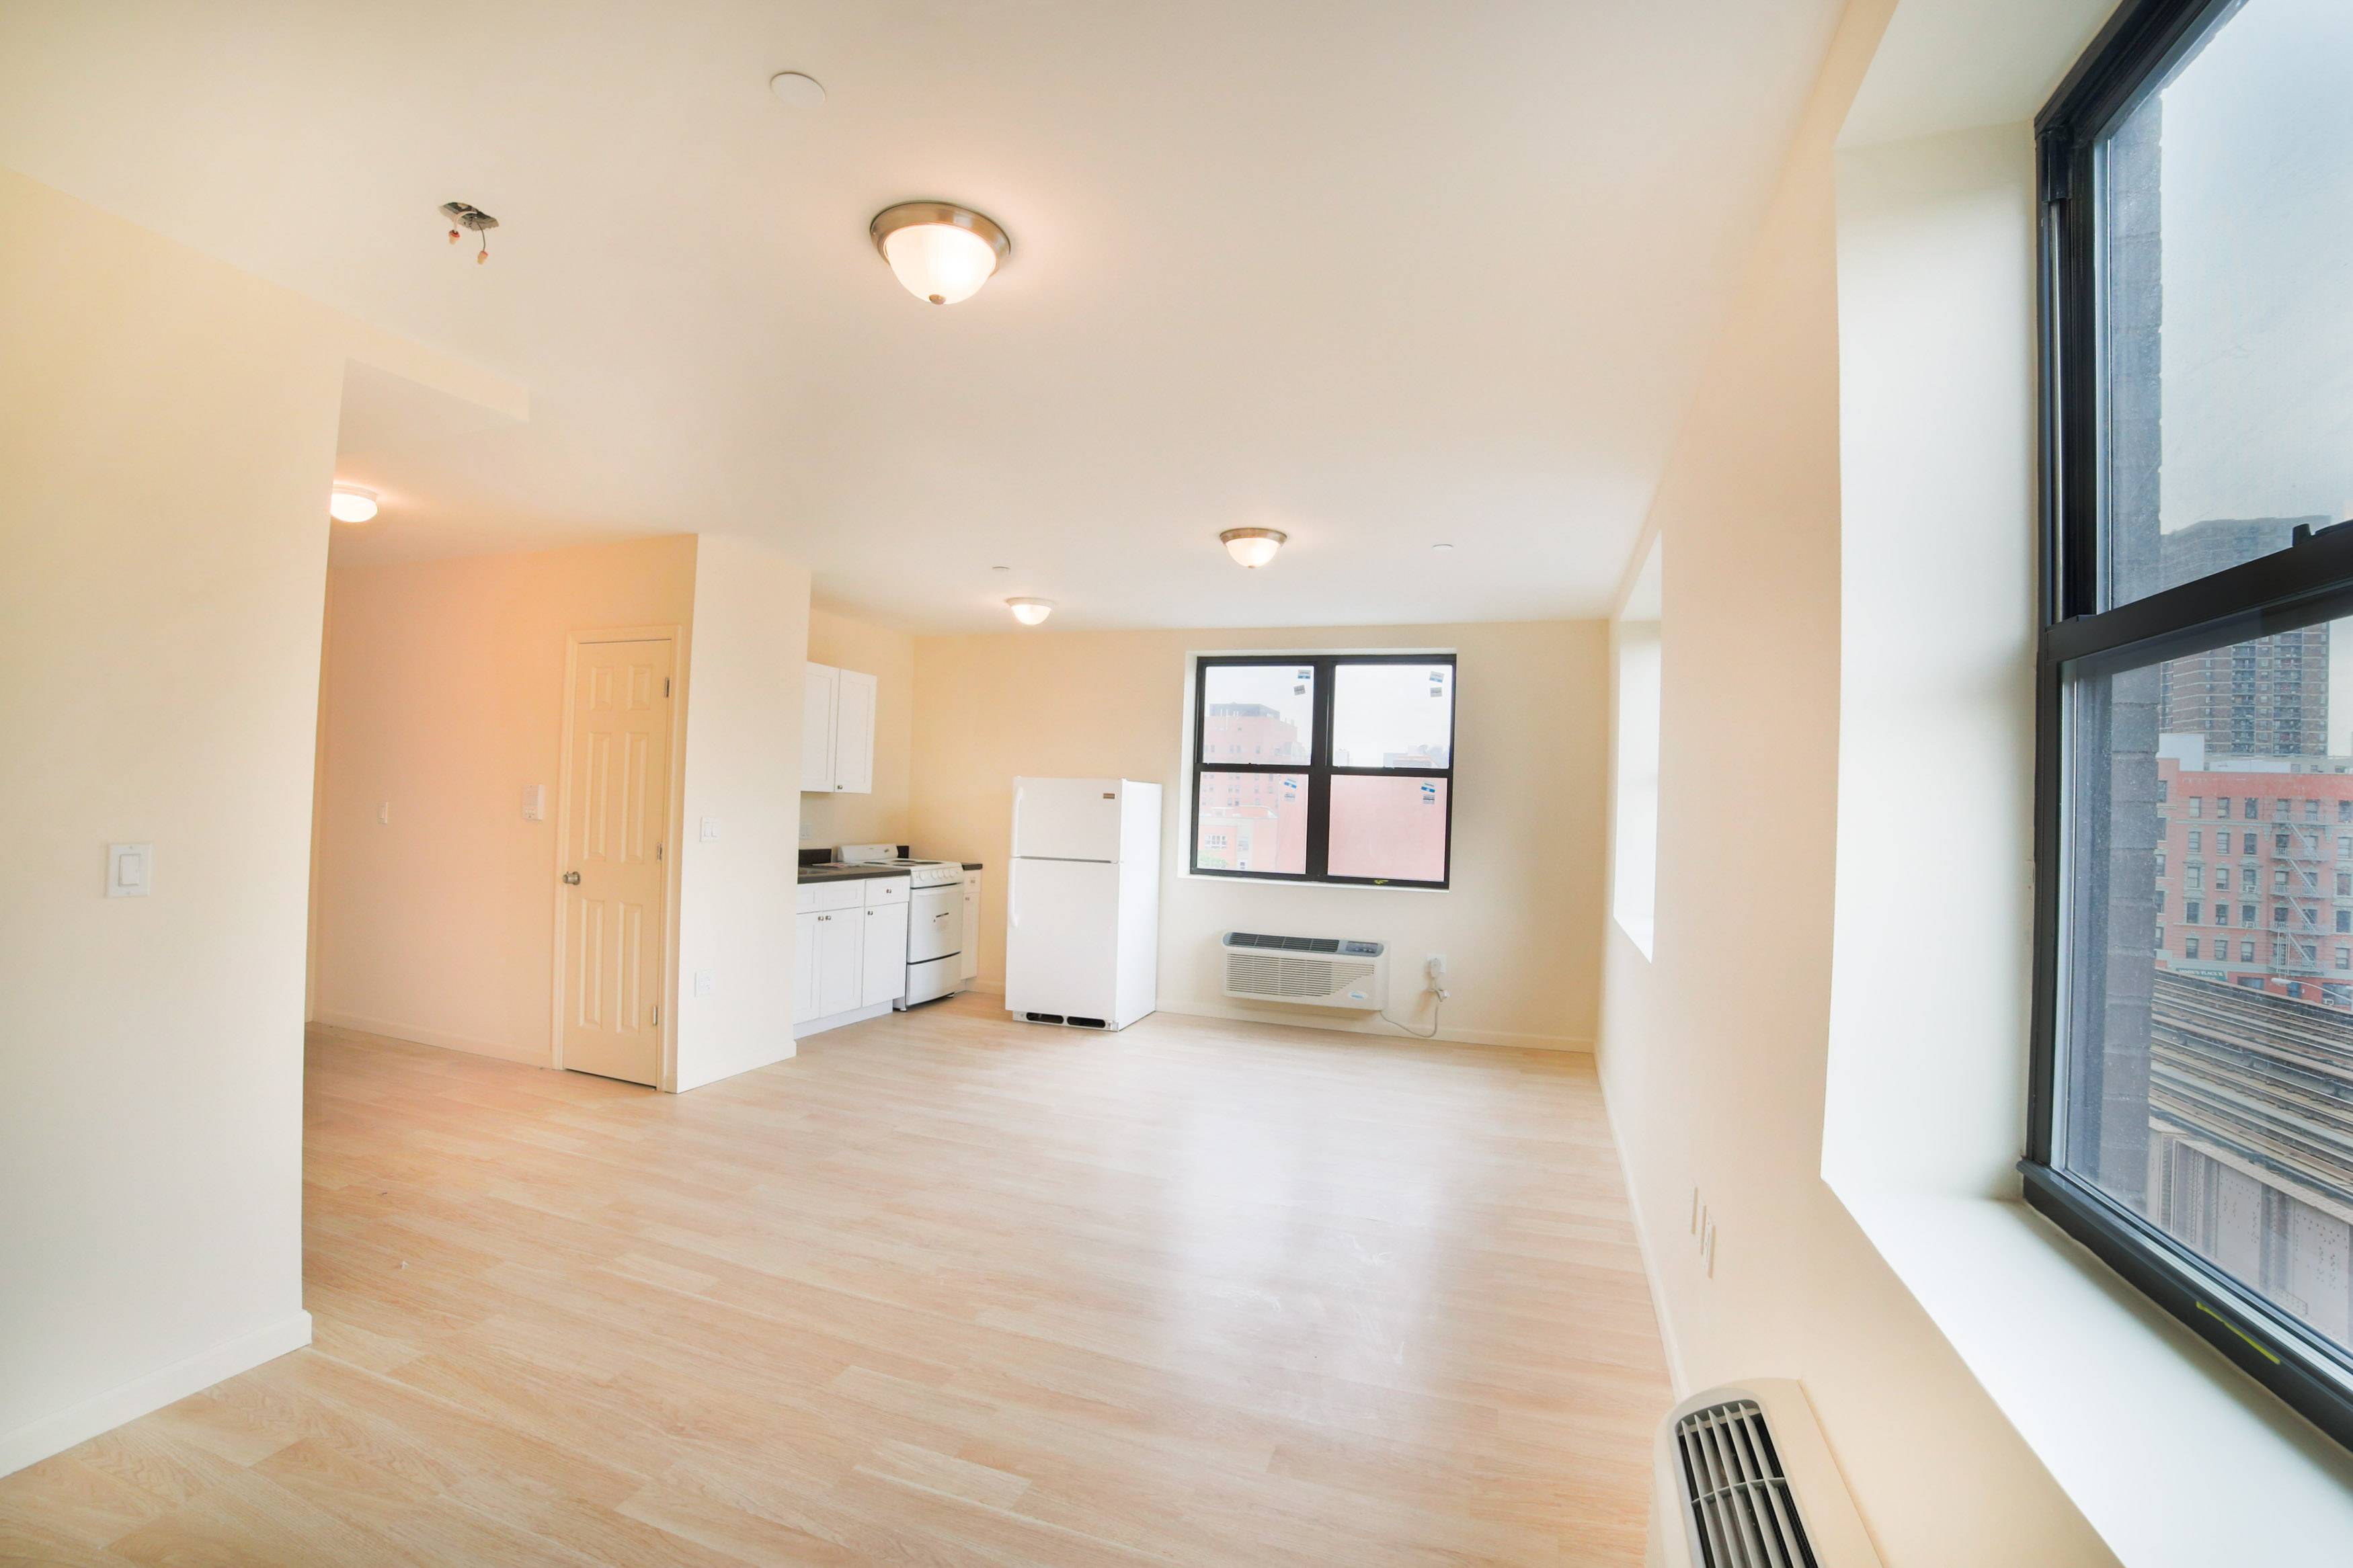 Harlem: 1674 Park Ave - Sun Drenched Alcove Studio in New Elevator Building